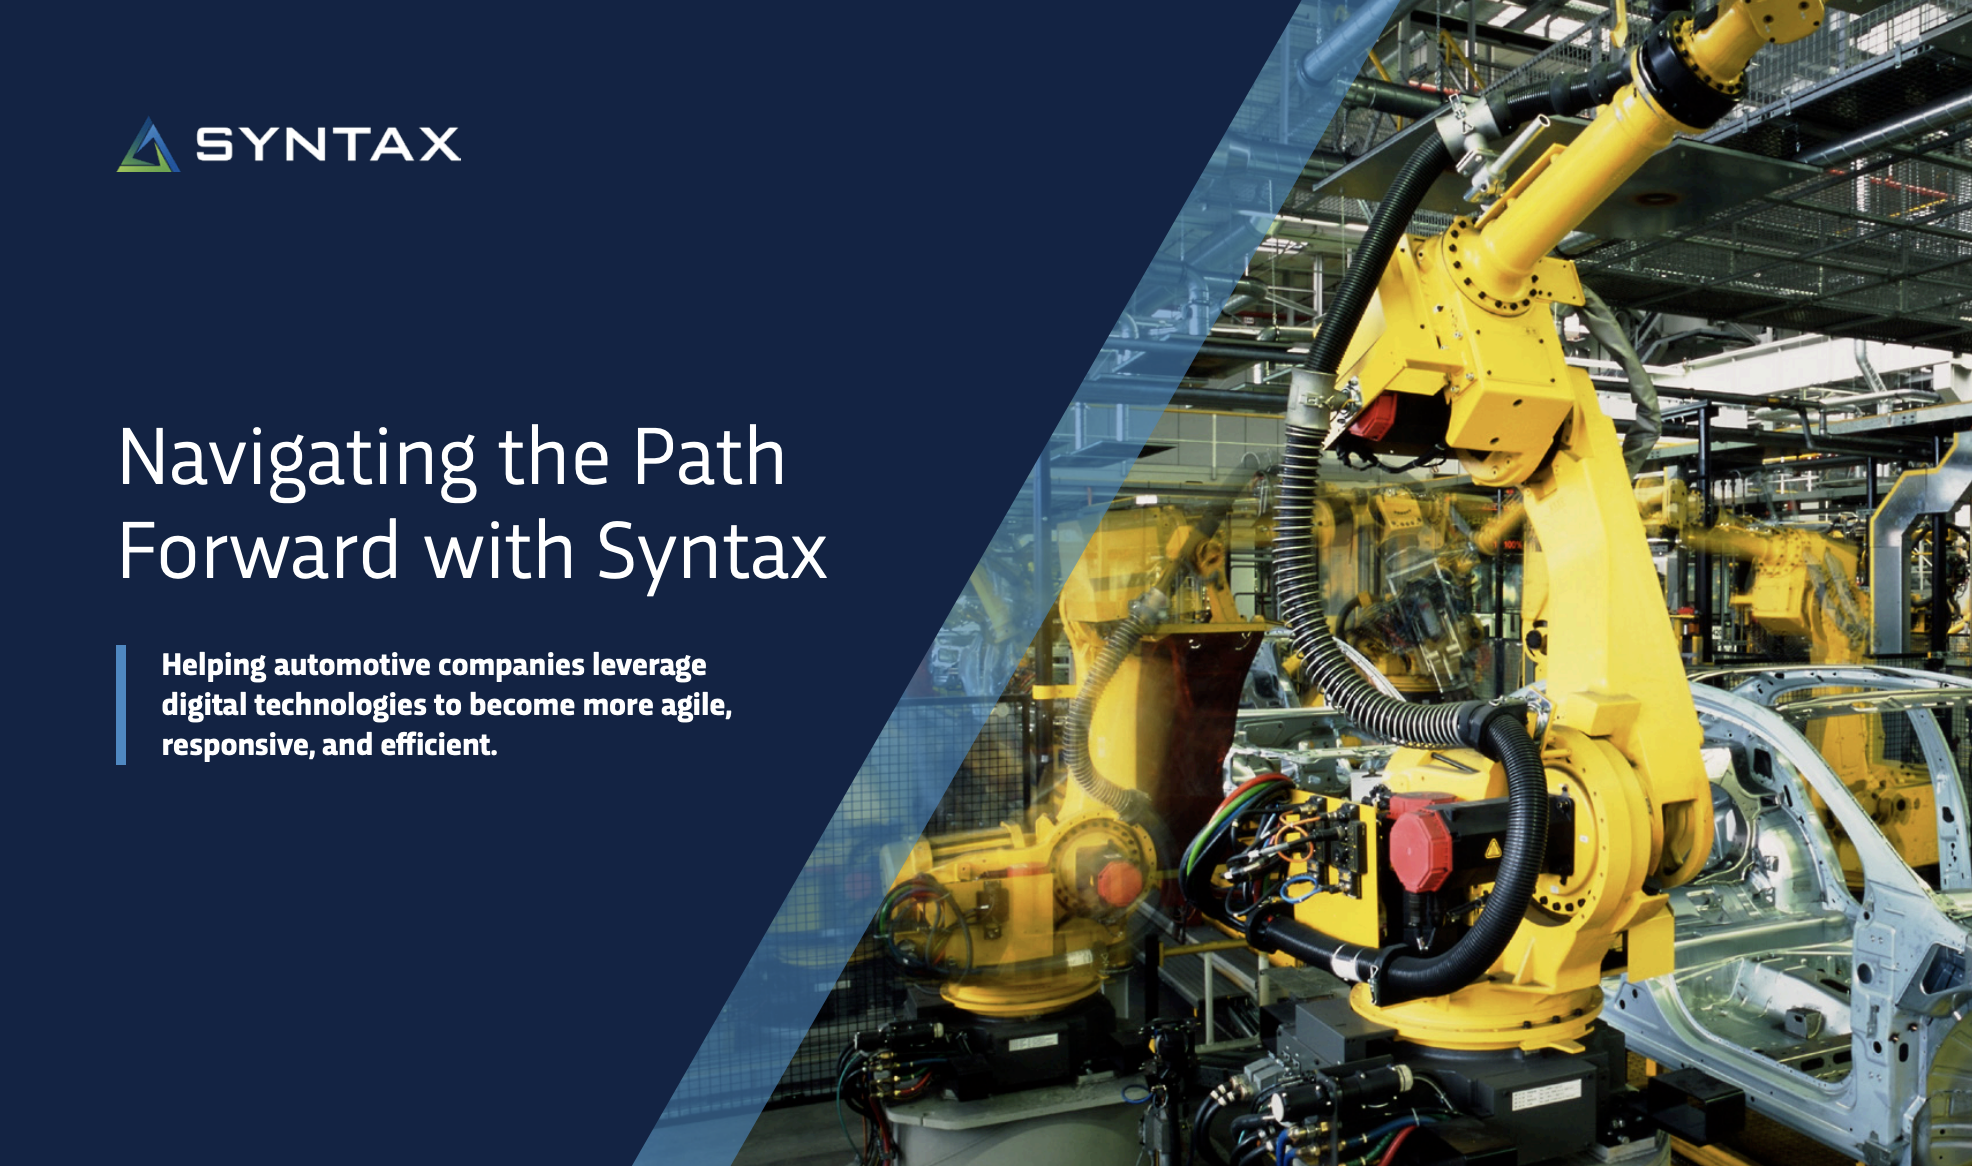 Navigating the path forward with Syntax